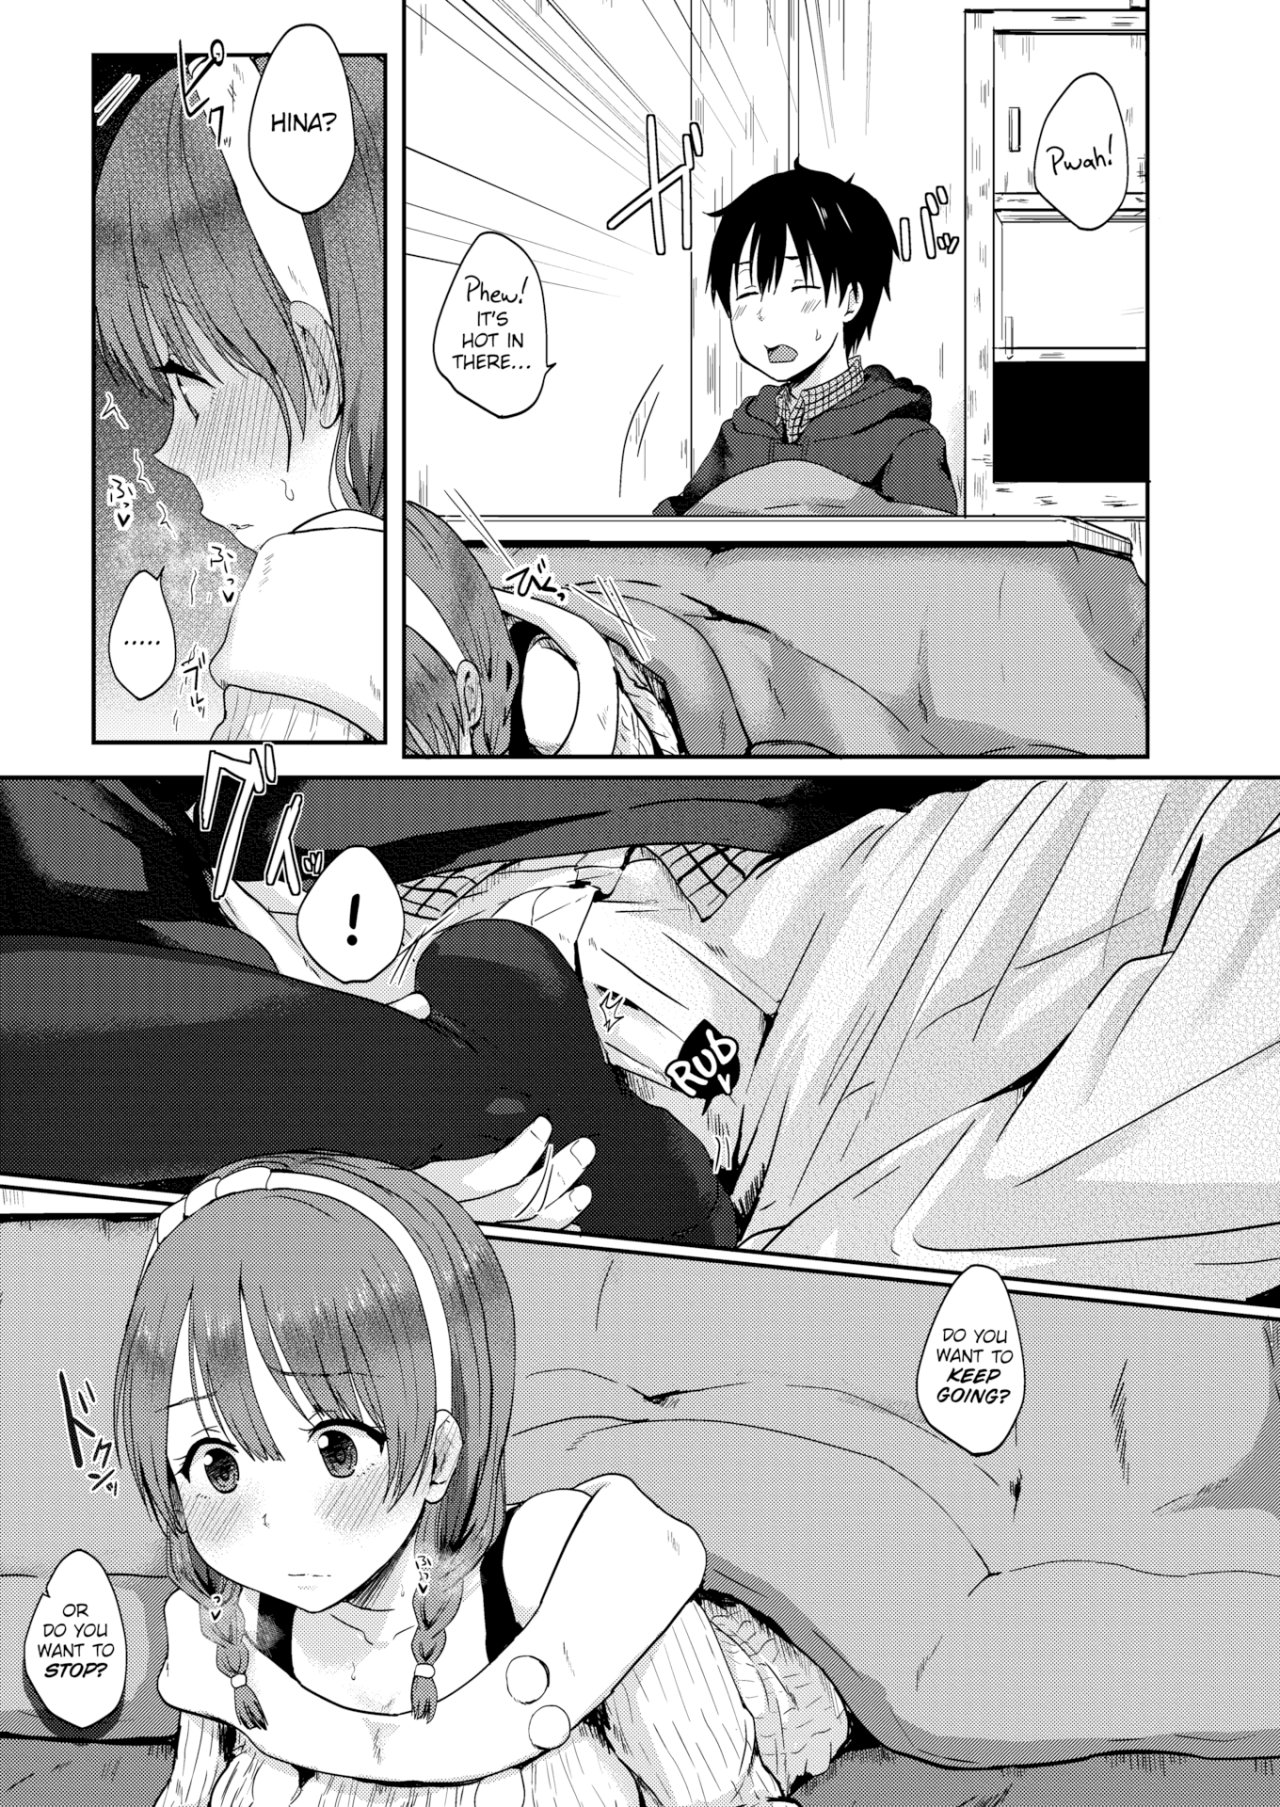 How to Get a Kotatsu Snail out of Her Shell - 5